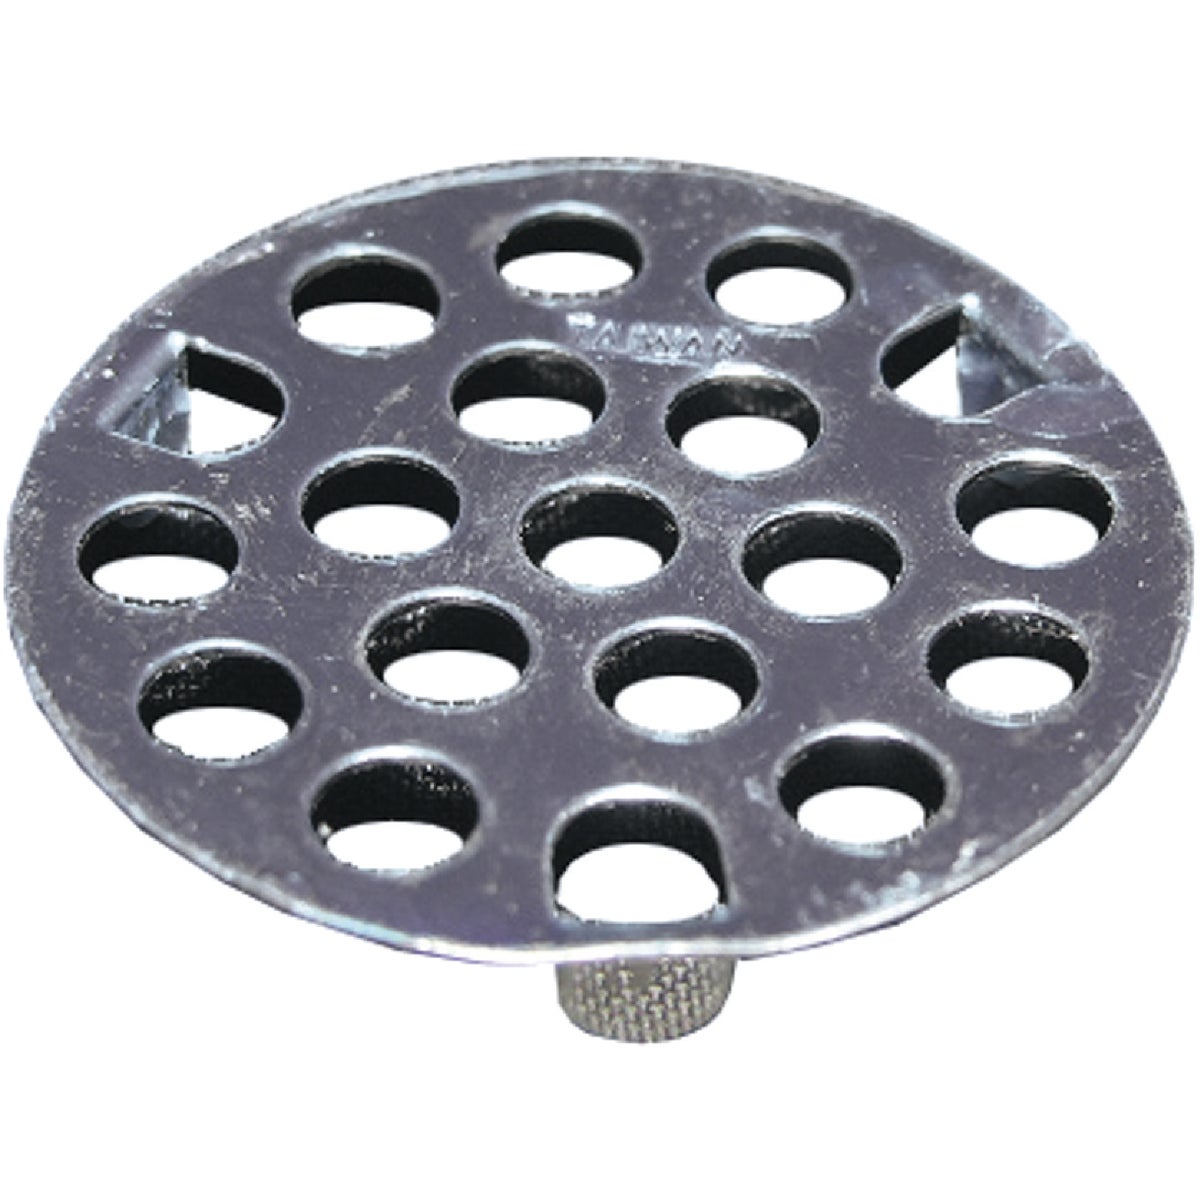 Lasco 1-5/8 In. Snap-In Tub Drain Strainer with Chrome Plated Finish